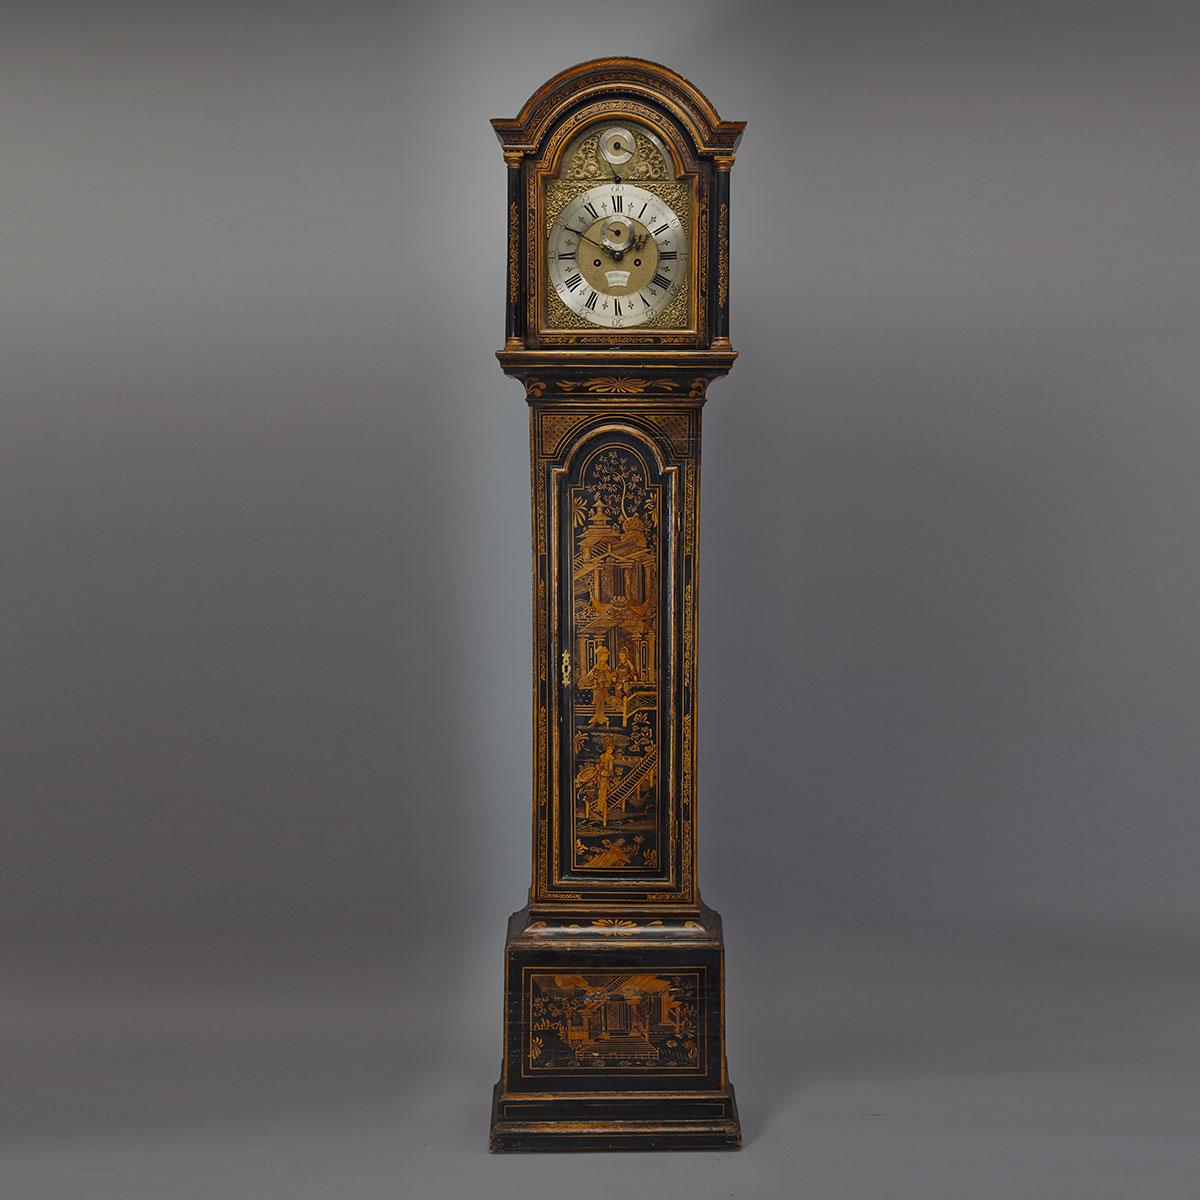 George III Black Japanned Tall case Clock with Equation of Time, John Burges, Gosport, c.1780